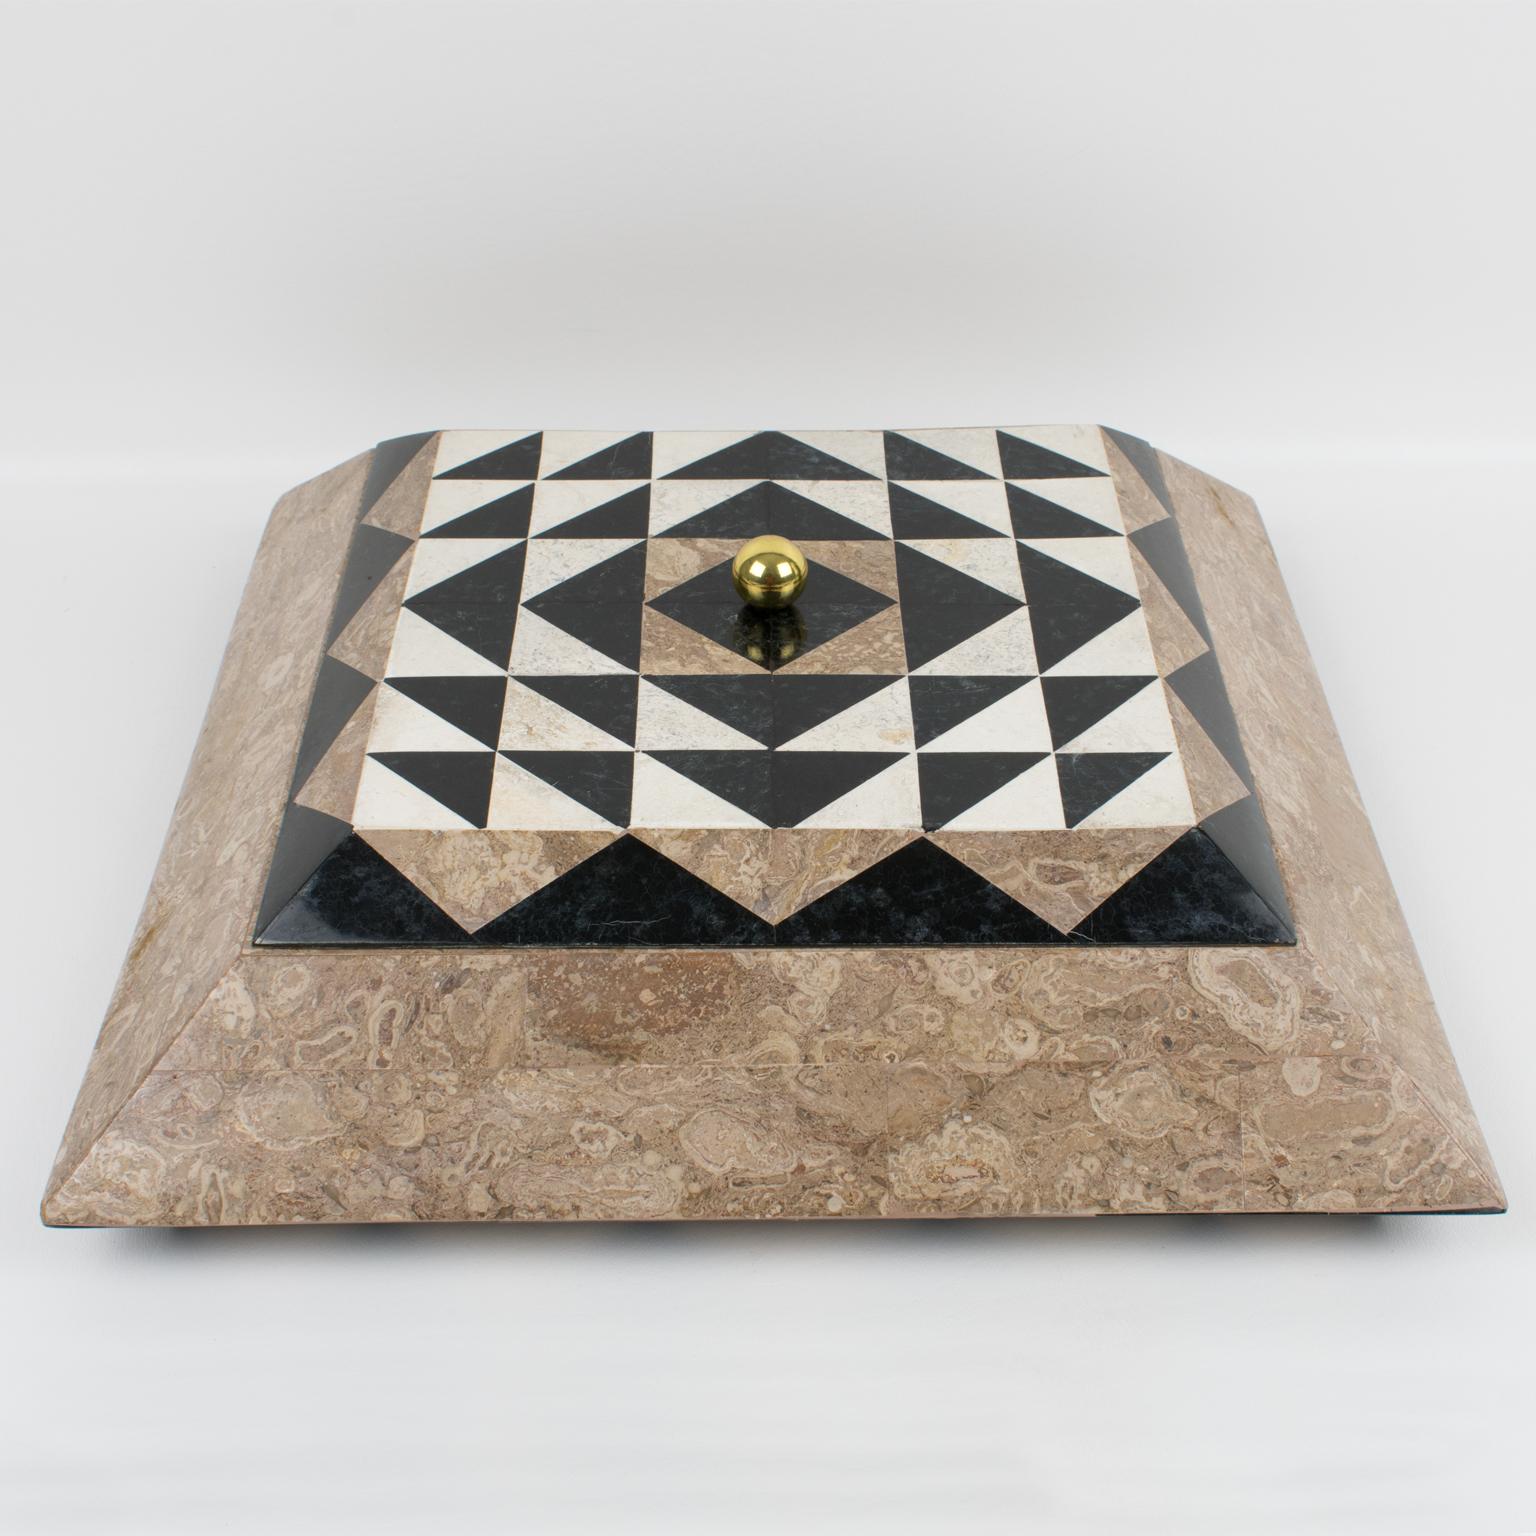 A spectacular lidded box designed by Maitland-Smith in the 1980s, rendered in tessellated marble, stone, travertine, and brass. The pyramidal square-shaped design boasts sand beige, black, and off-white colors with an interesting geometric